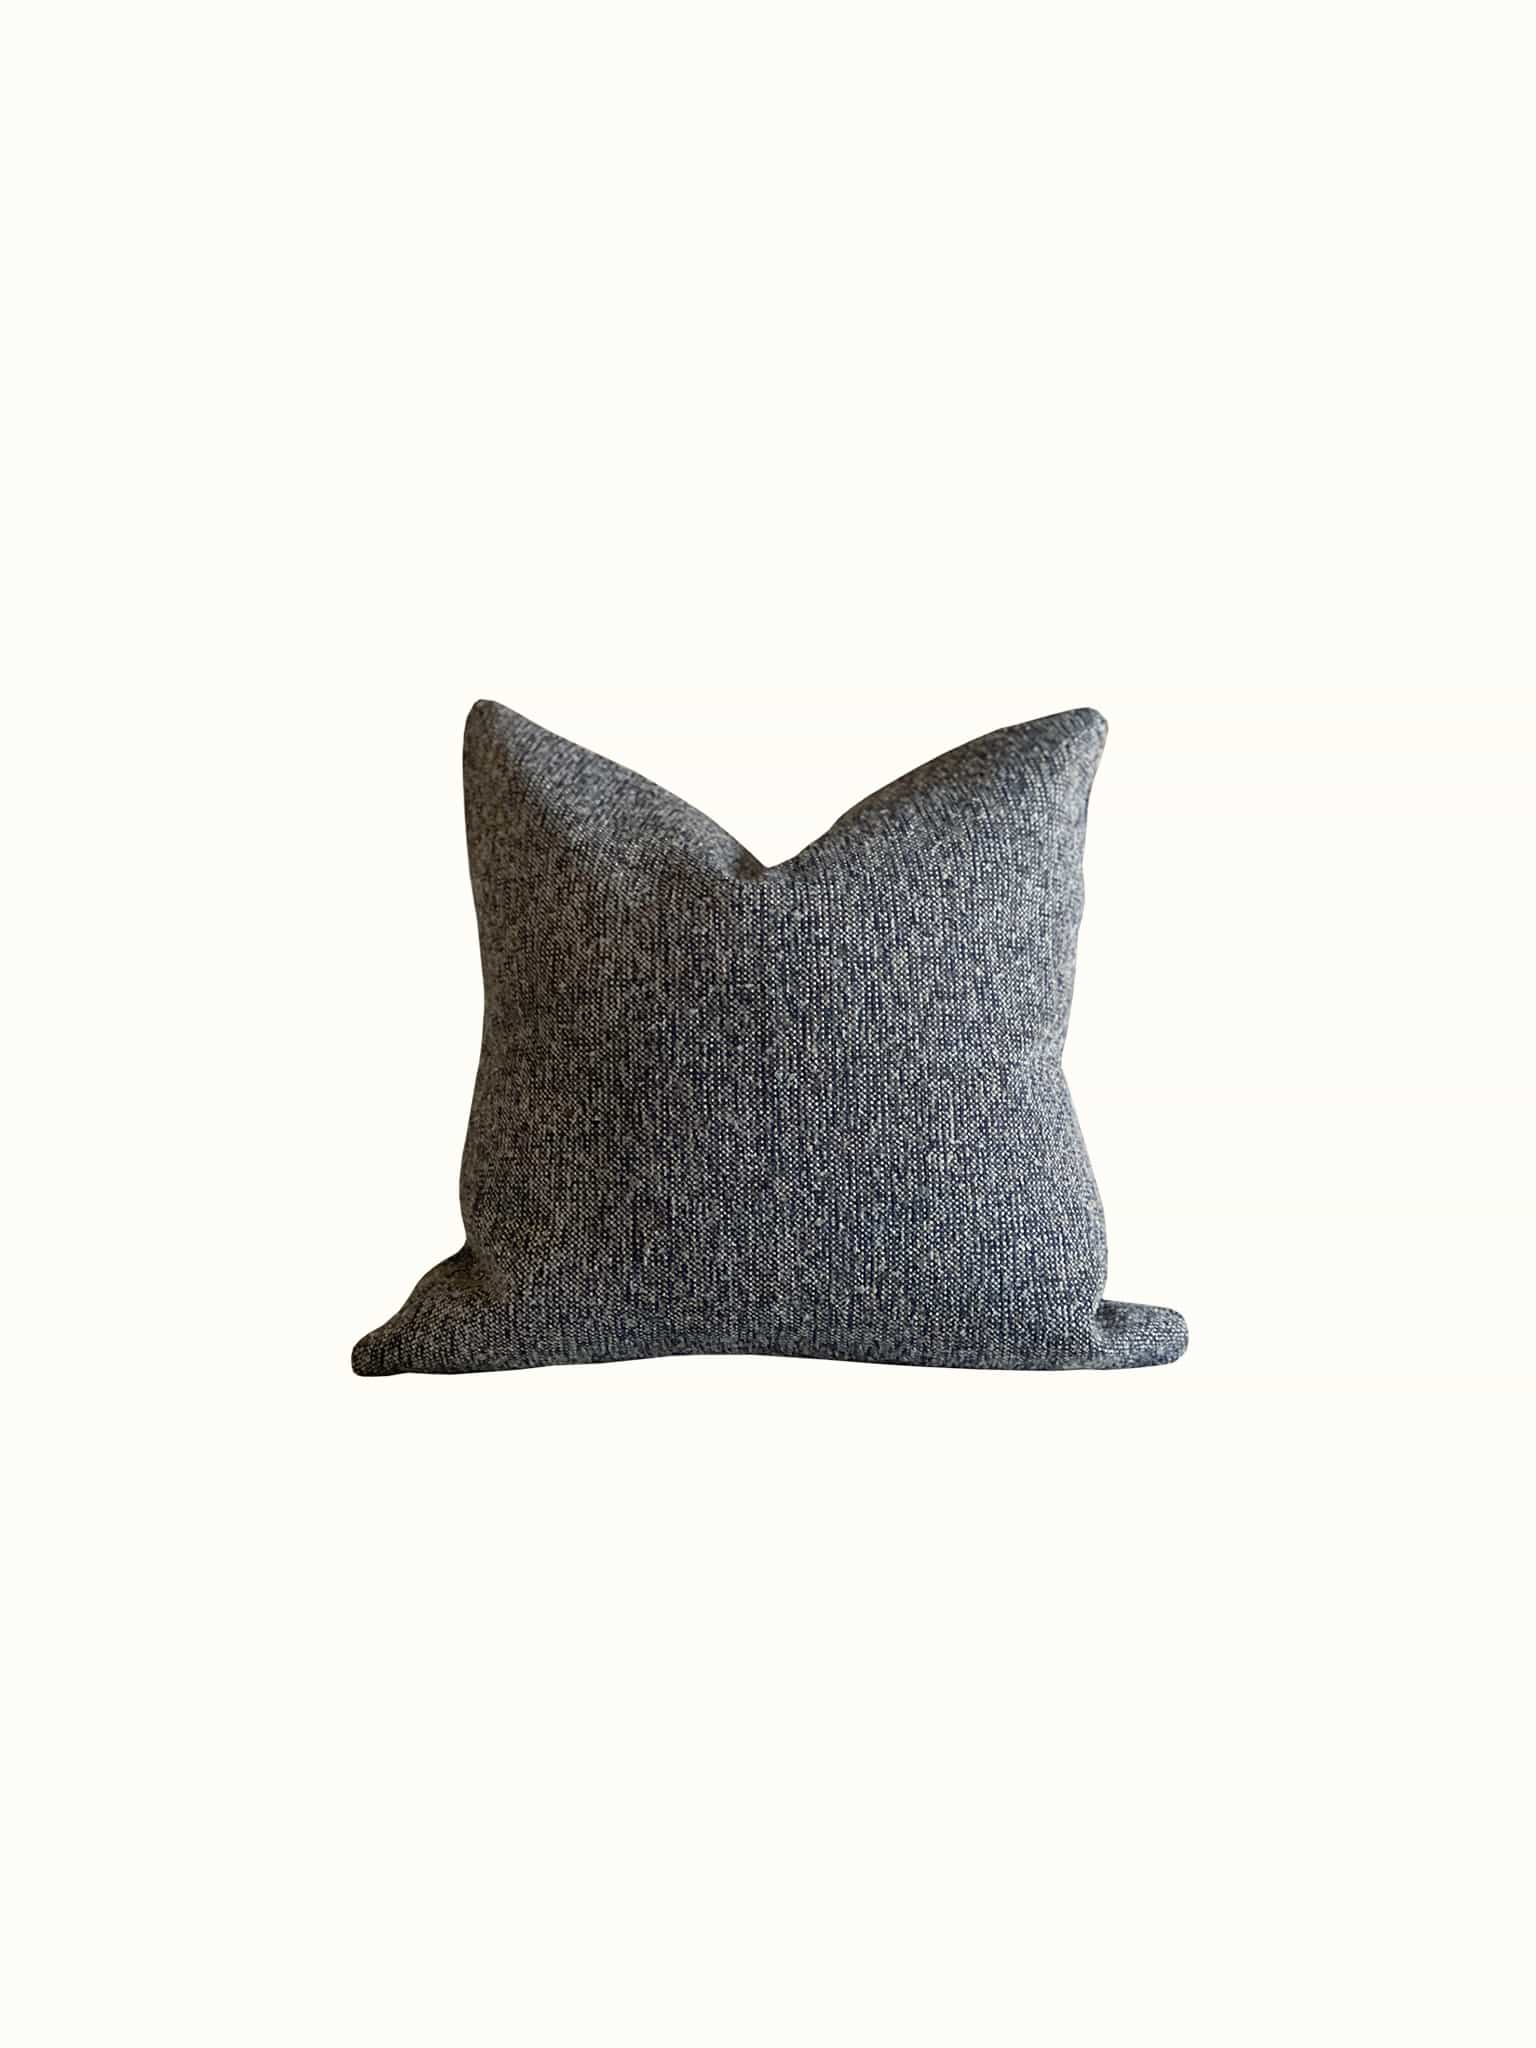 Dark blue boucle square pillow in midcentury modern style at Cielle Home